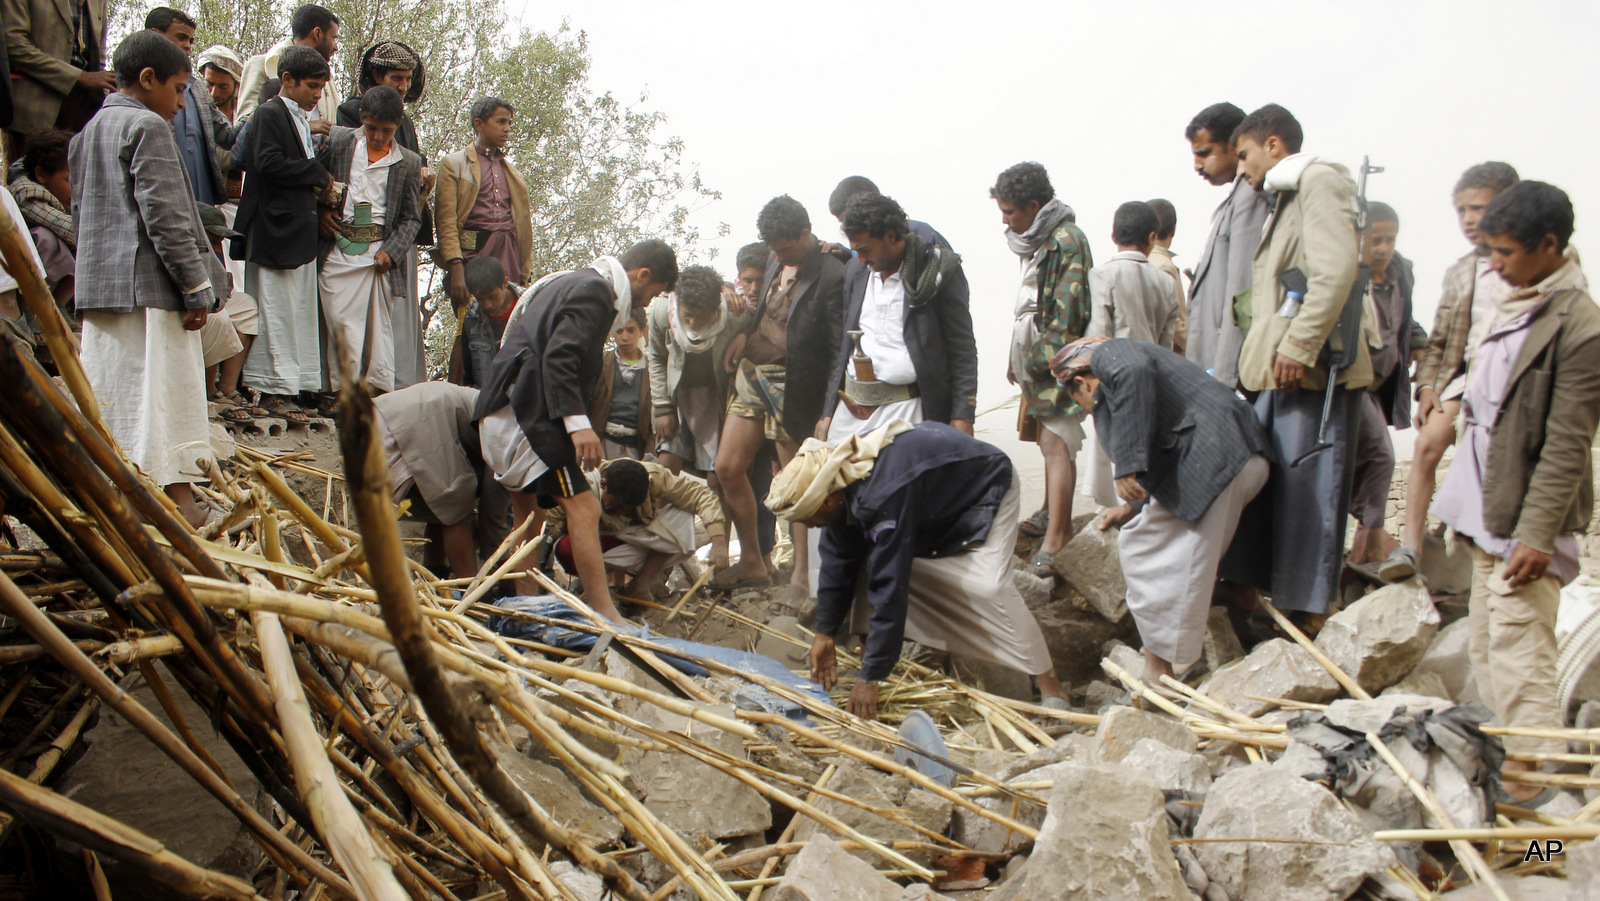 Yemenis search for survivors in the rubble of houses destroyed by Saudi-led airstrikes in a village near Sanaa, Yemen, Saturday, April 4, 2015.